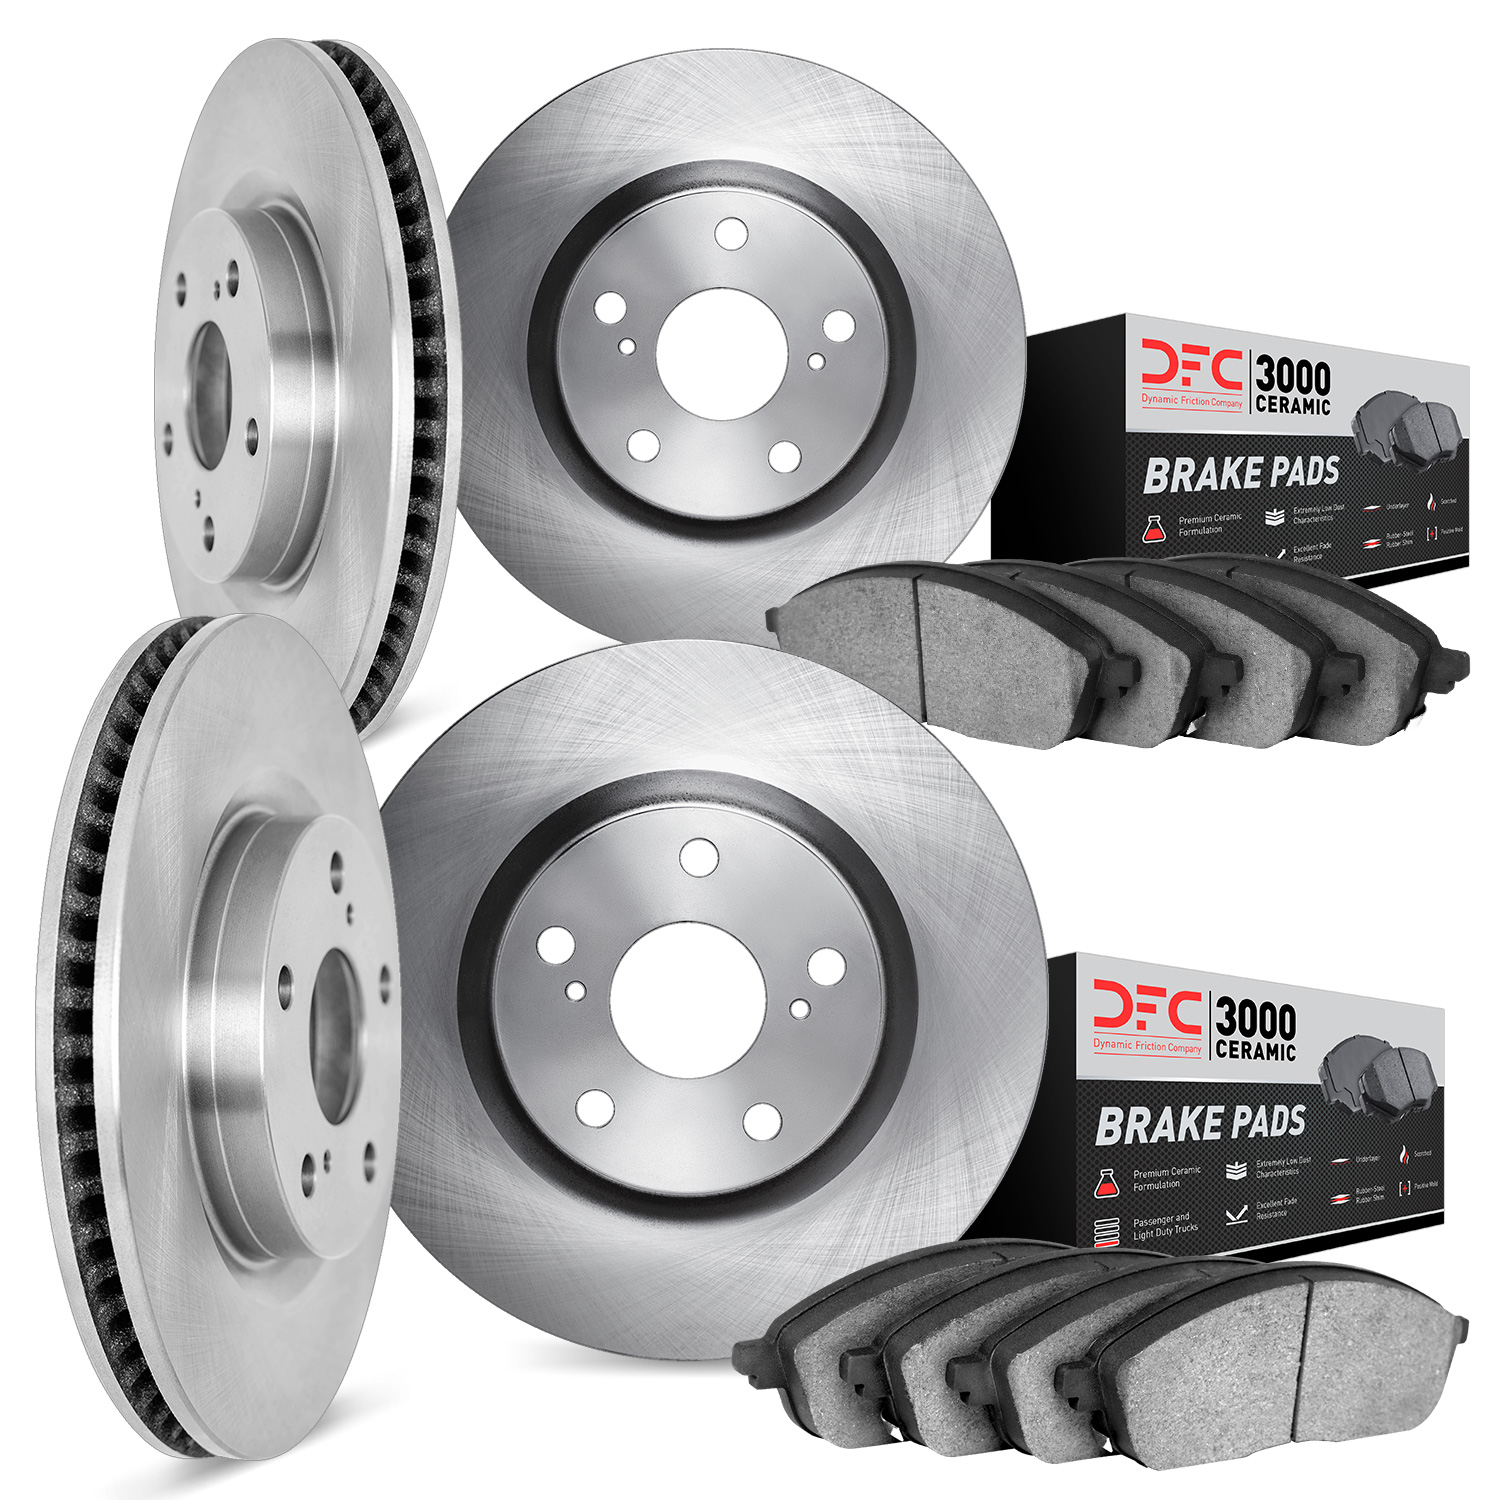 6304-75010 Brake Rotors with 3000-Series Ceramic Brake Pads Kit, 2006-2013 Lexus/Toyota/Scion, Position: Front and Rear